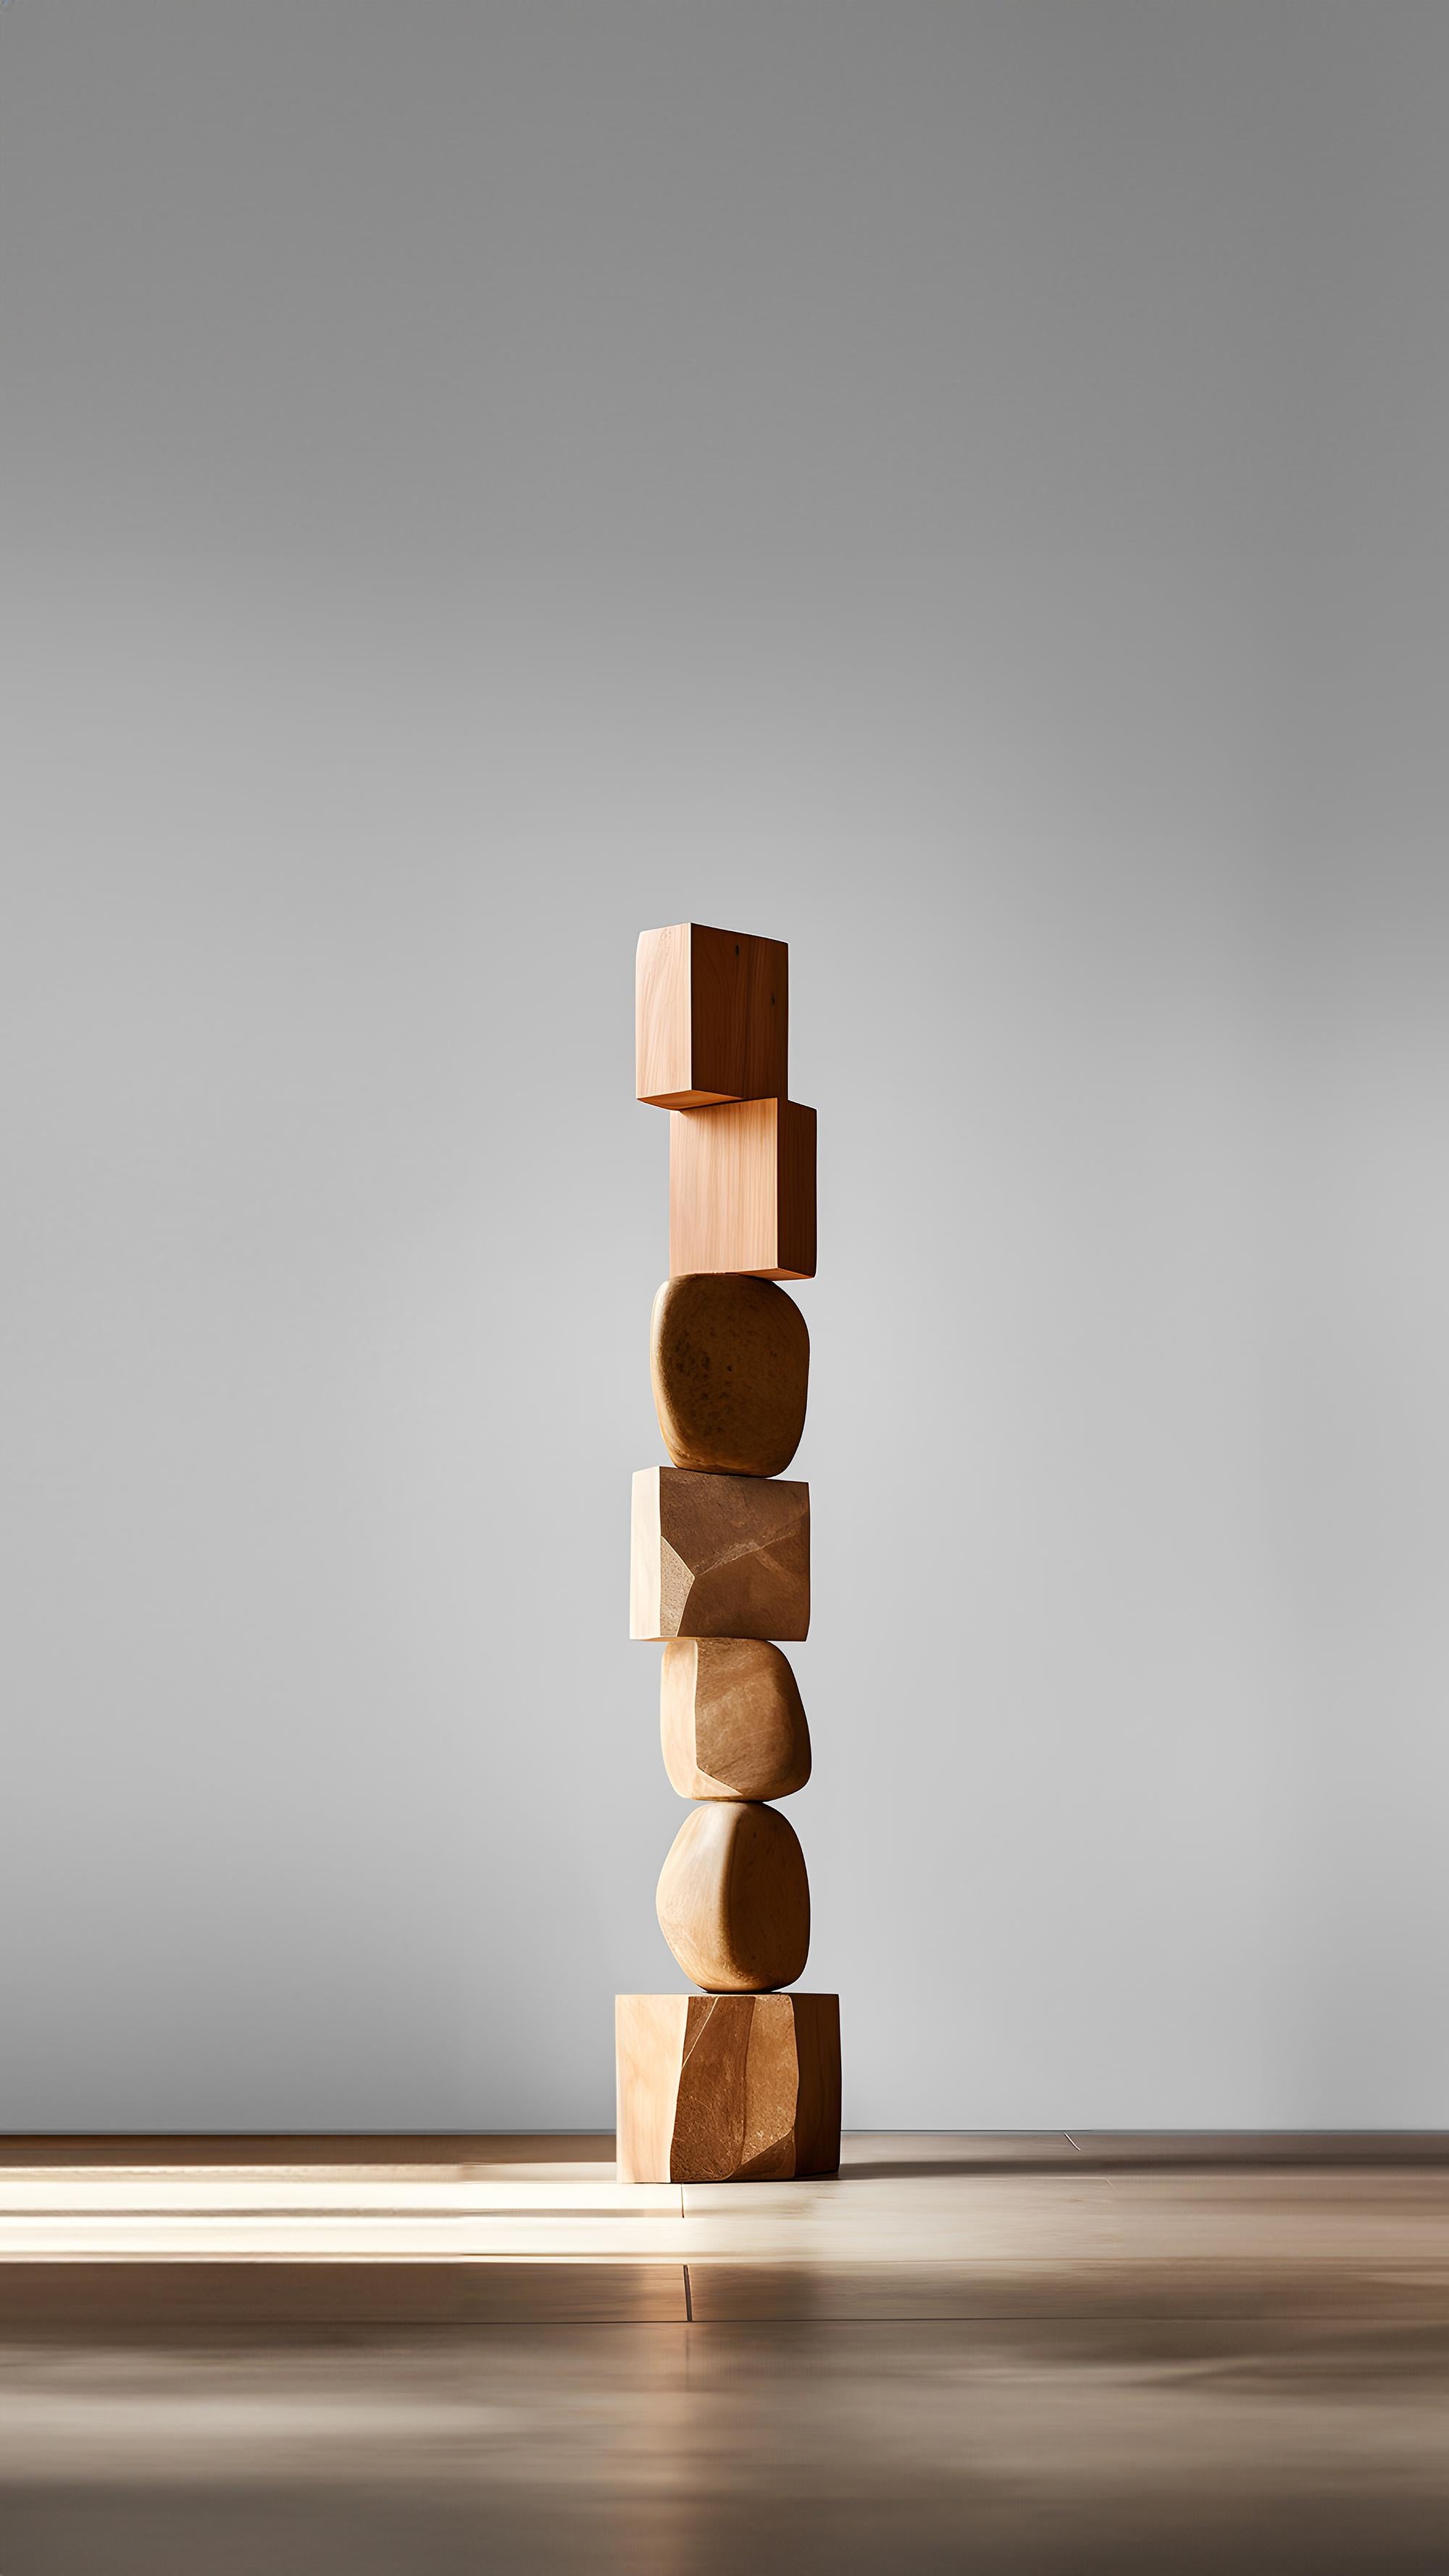 Hand-Crafted Abstract Wooden Serenity Still Stand No75 by NONO, Modern Escalona Sculpture For Sale